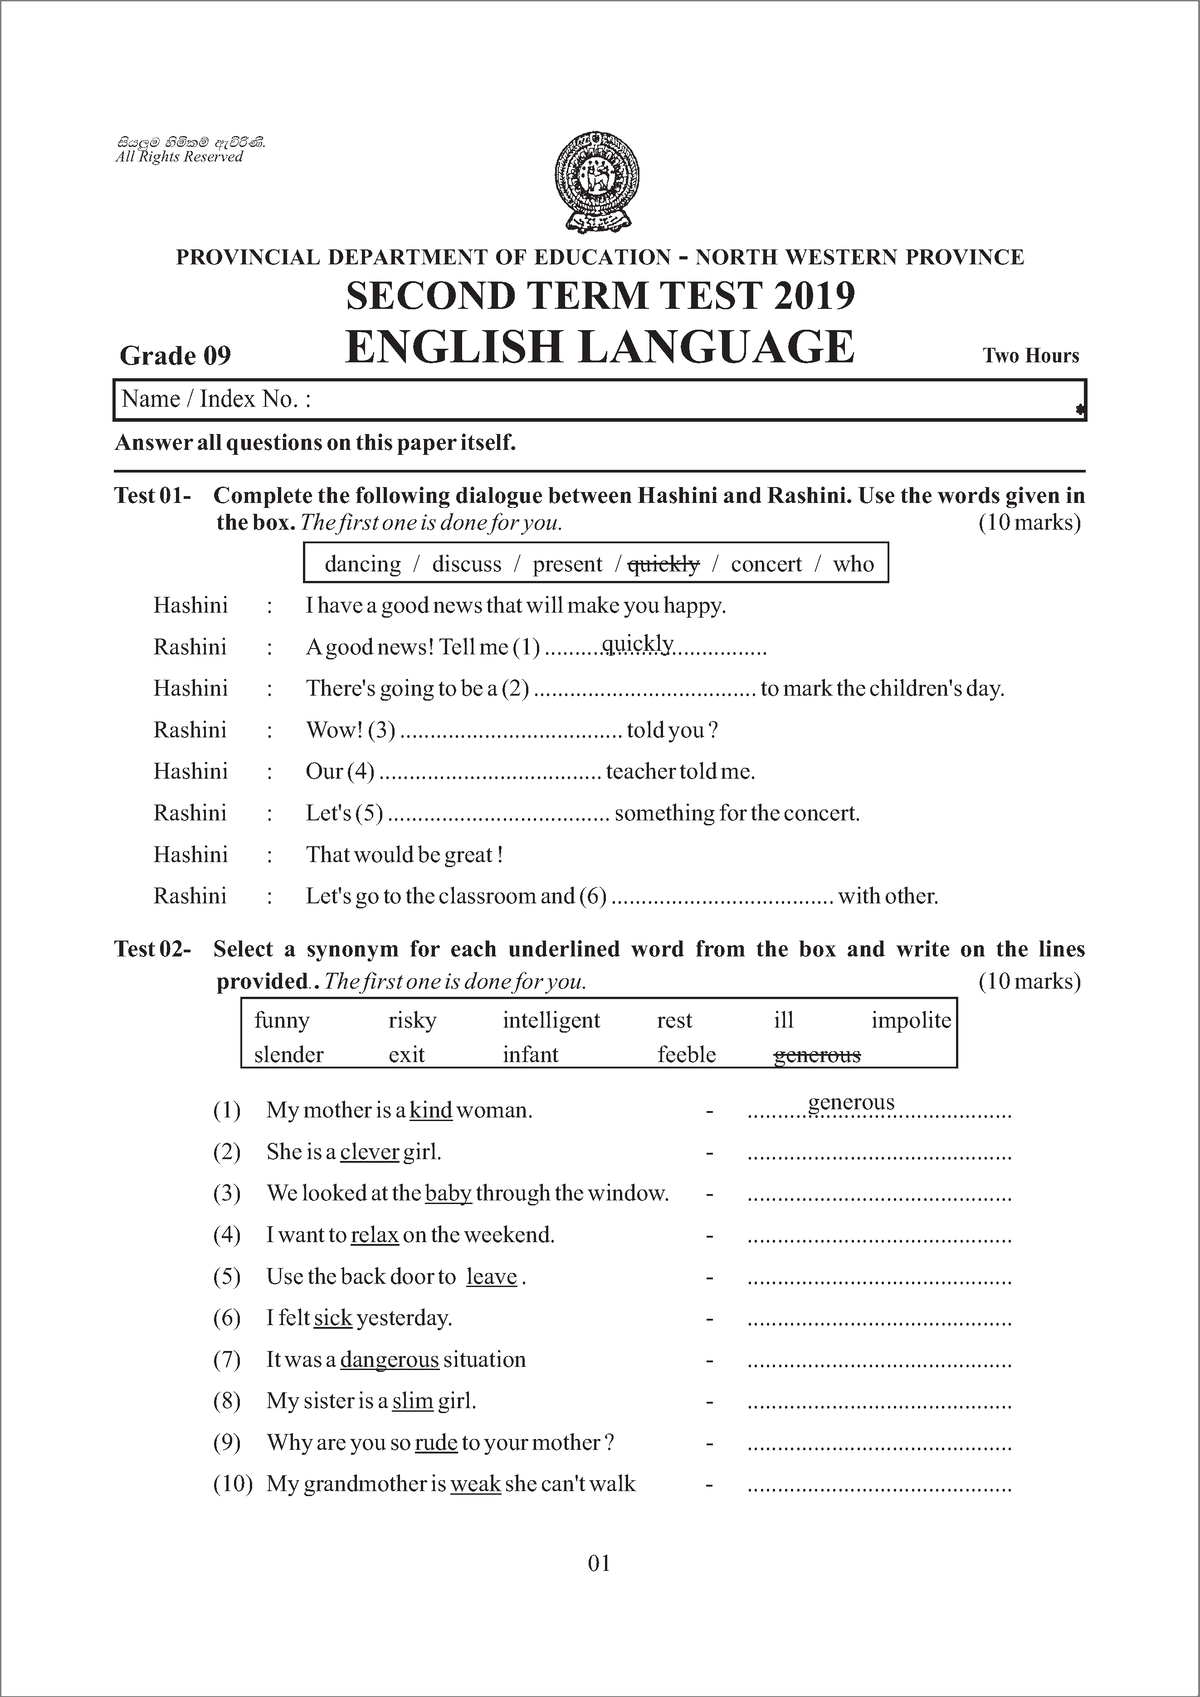 Grade 09 English 2nd Term Test Paper With Answers 2019 North western  Province - Answer all questions - Studocu